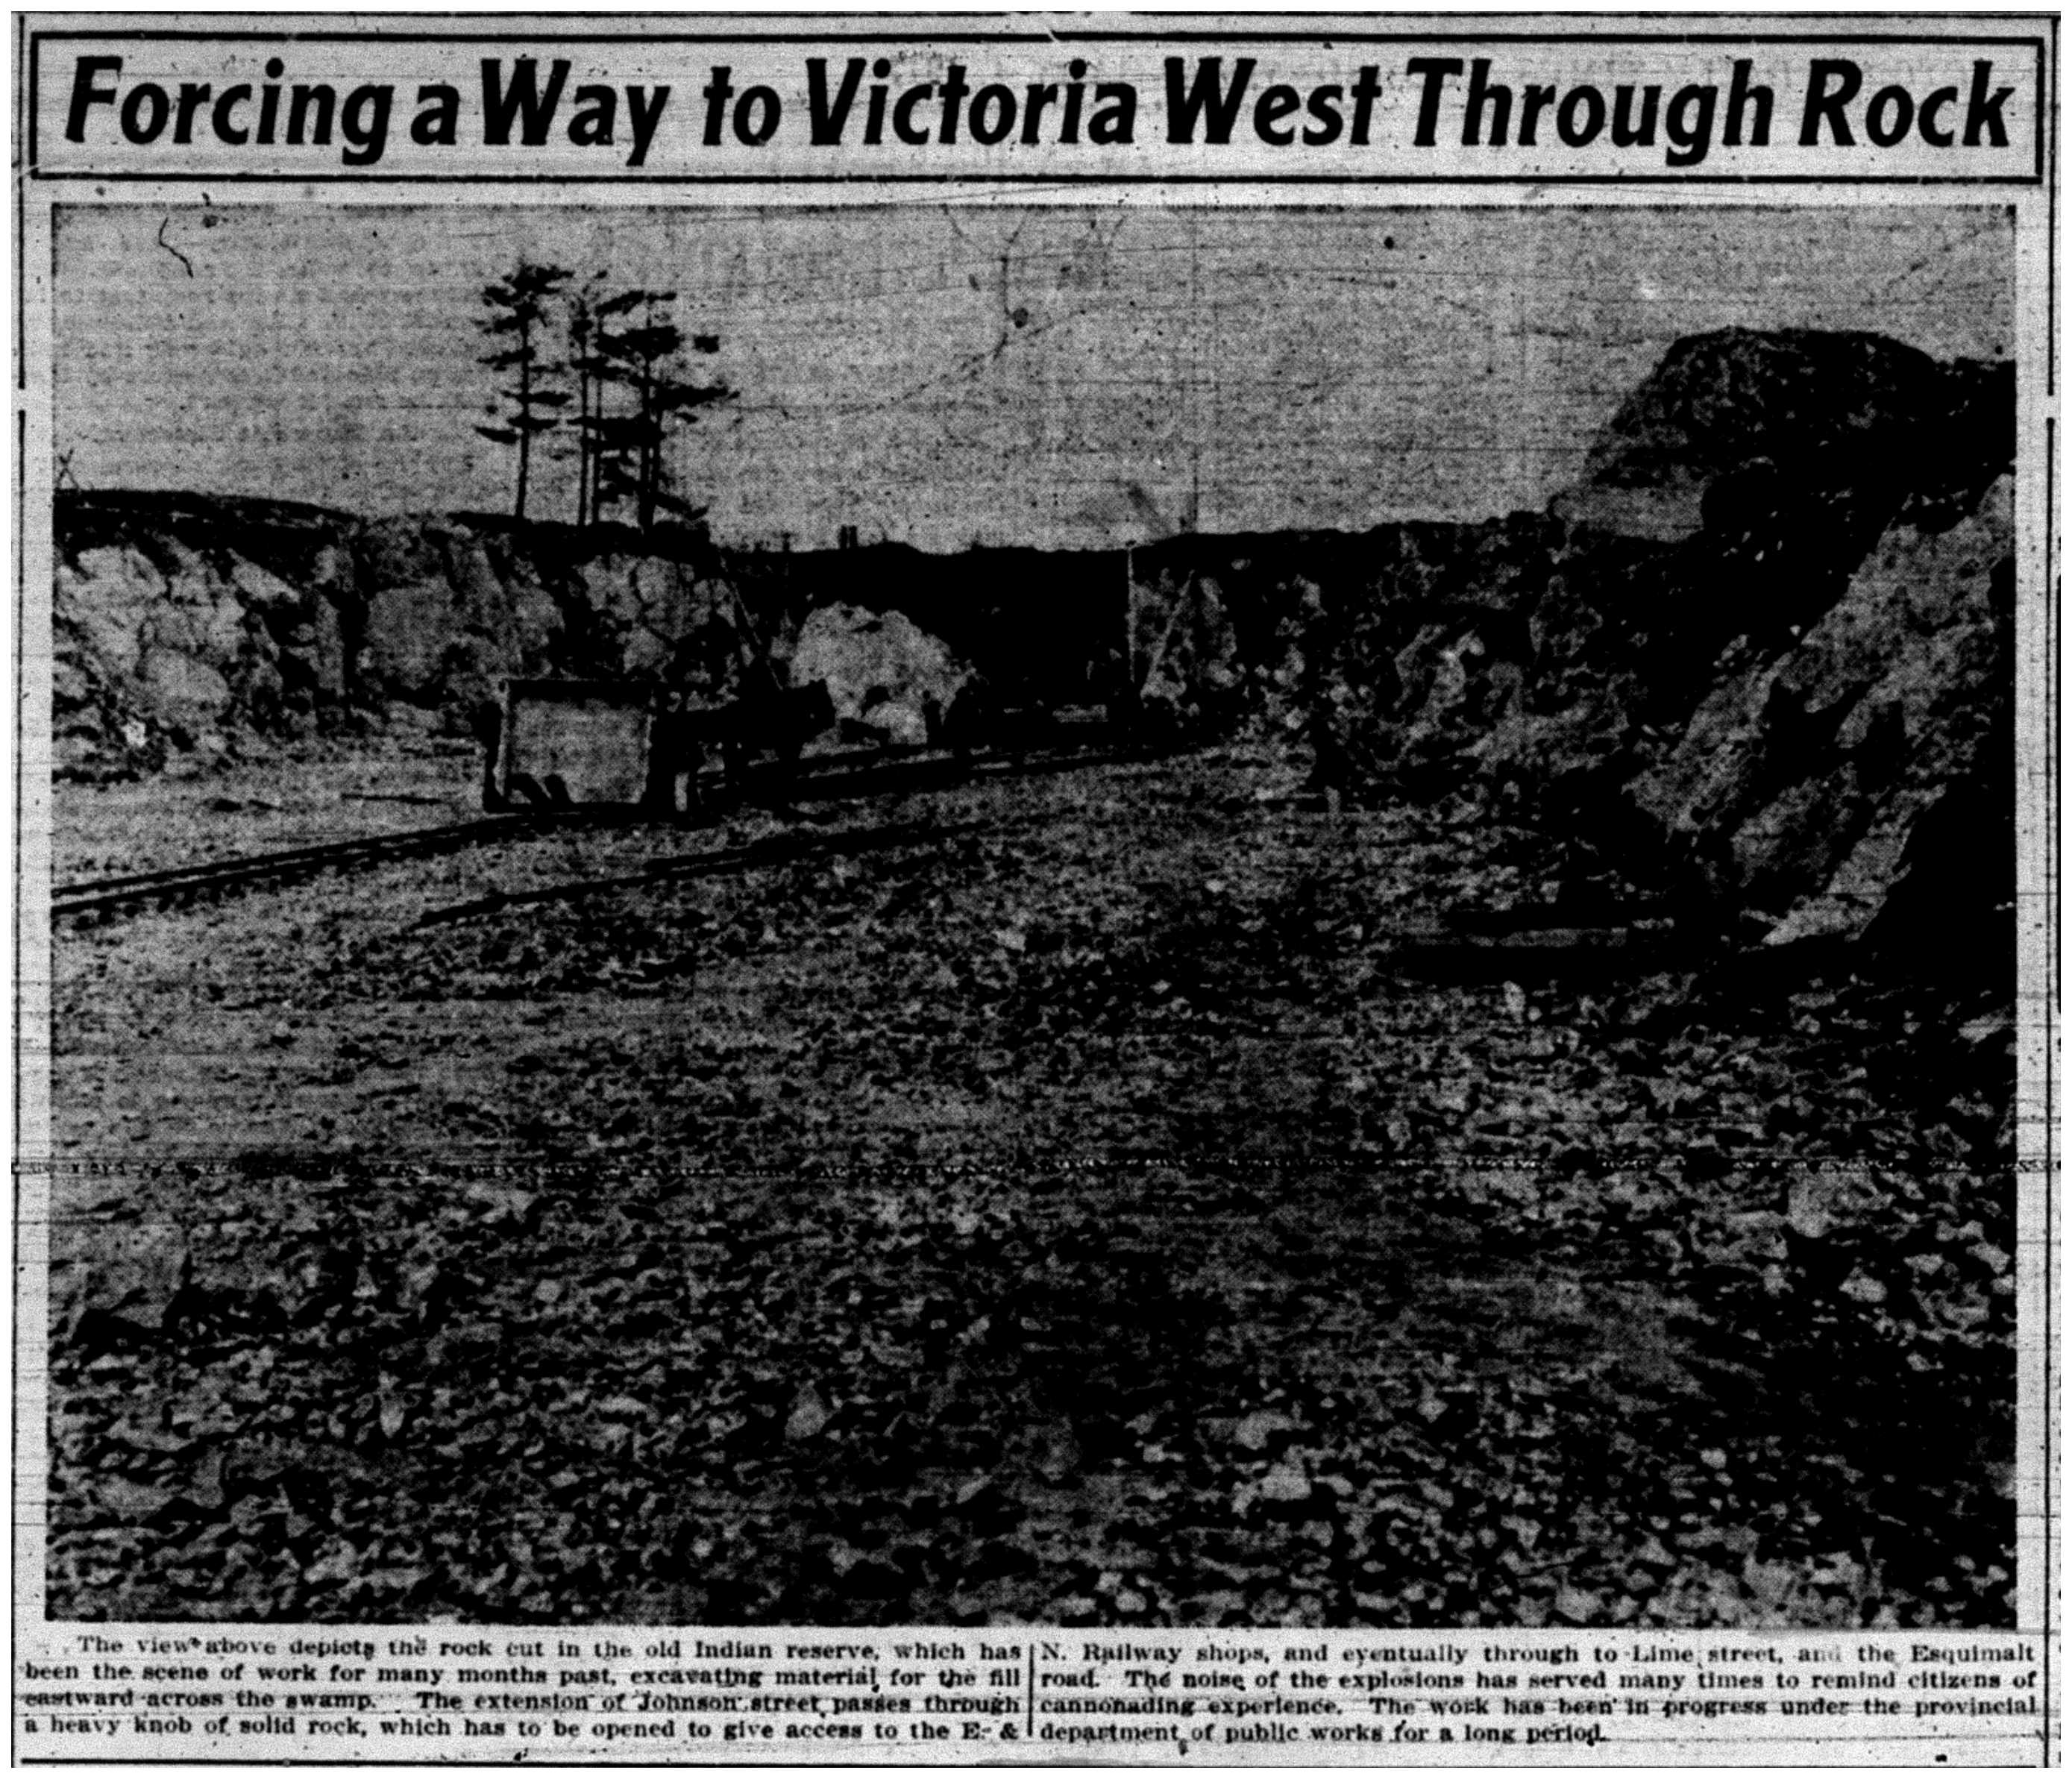 "Forcing a Way to Victoria West Through Rock"